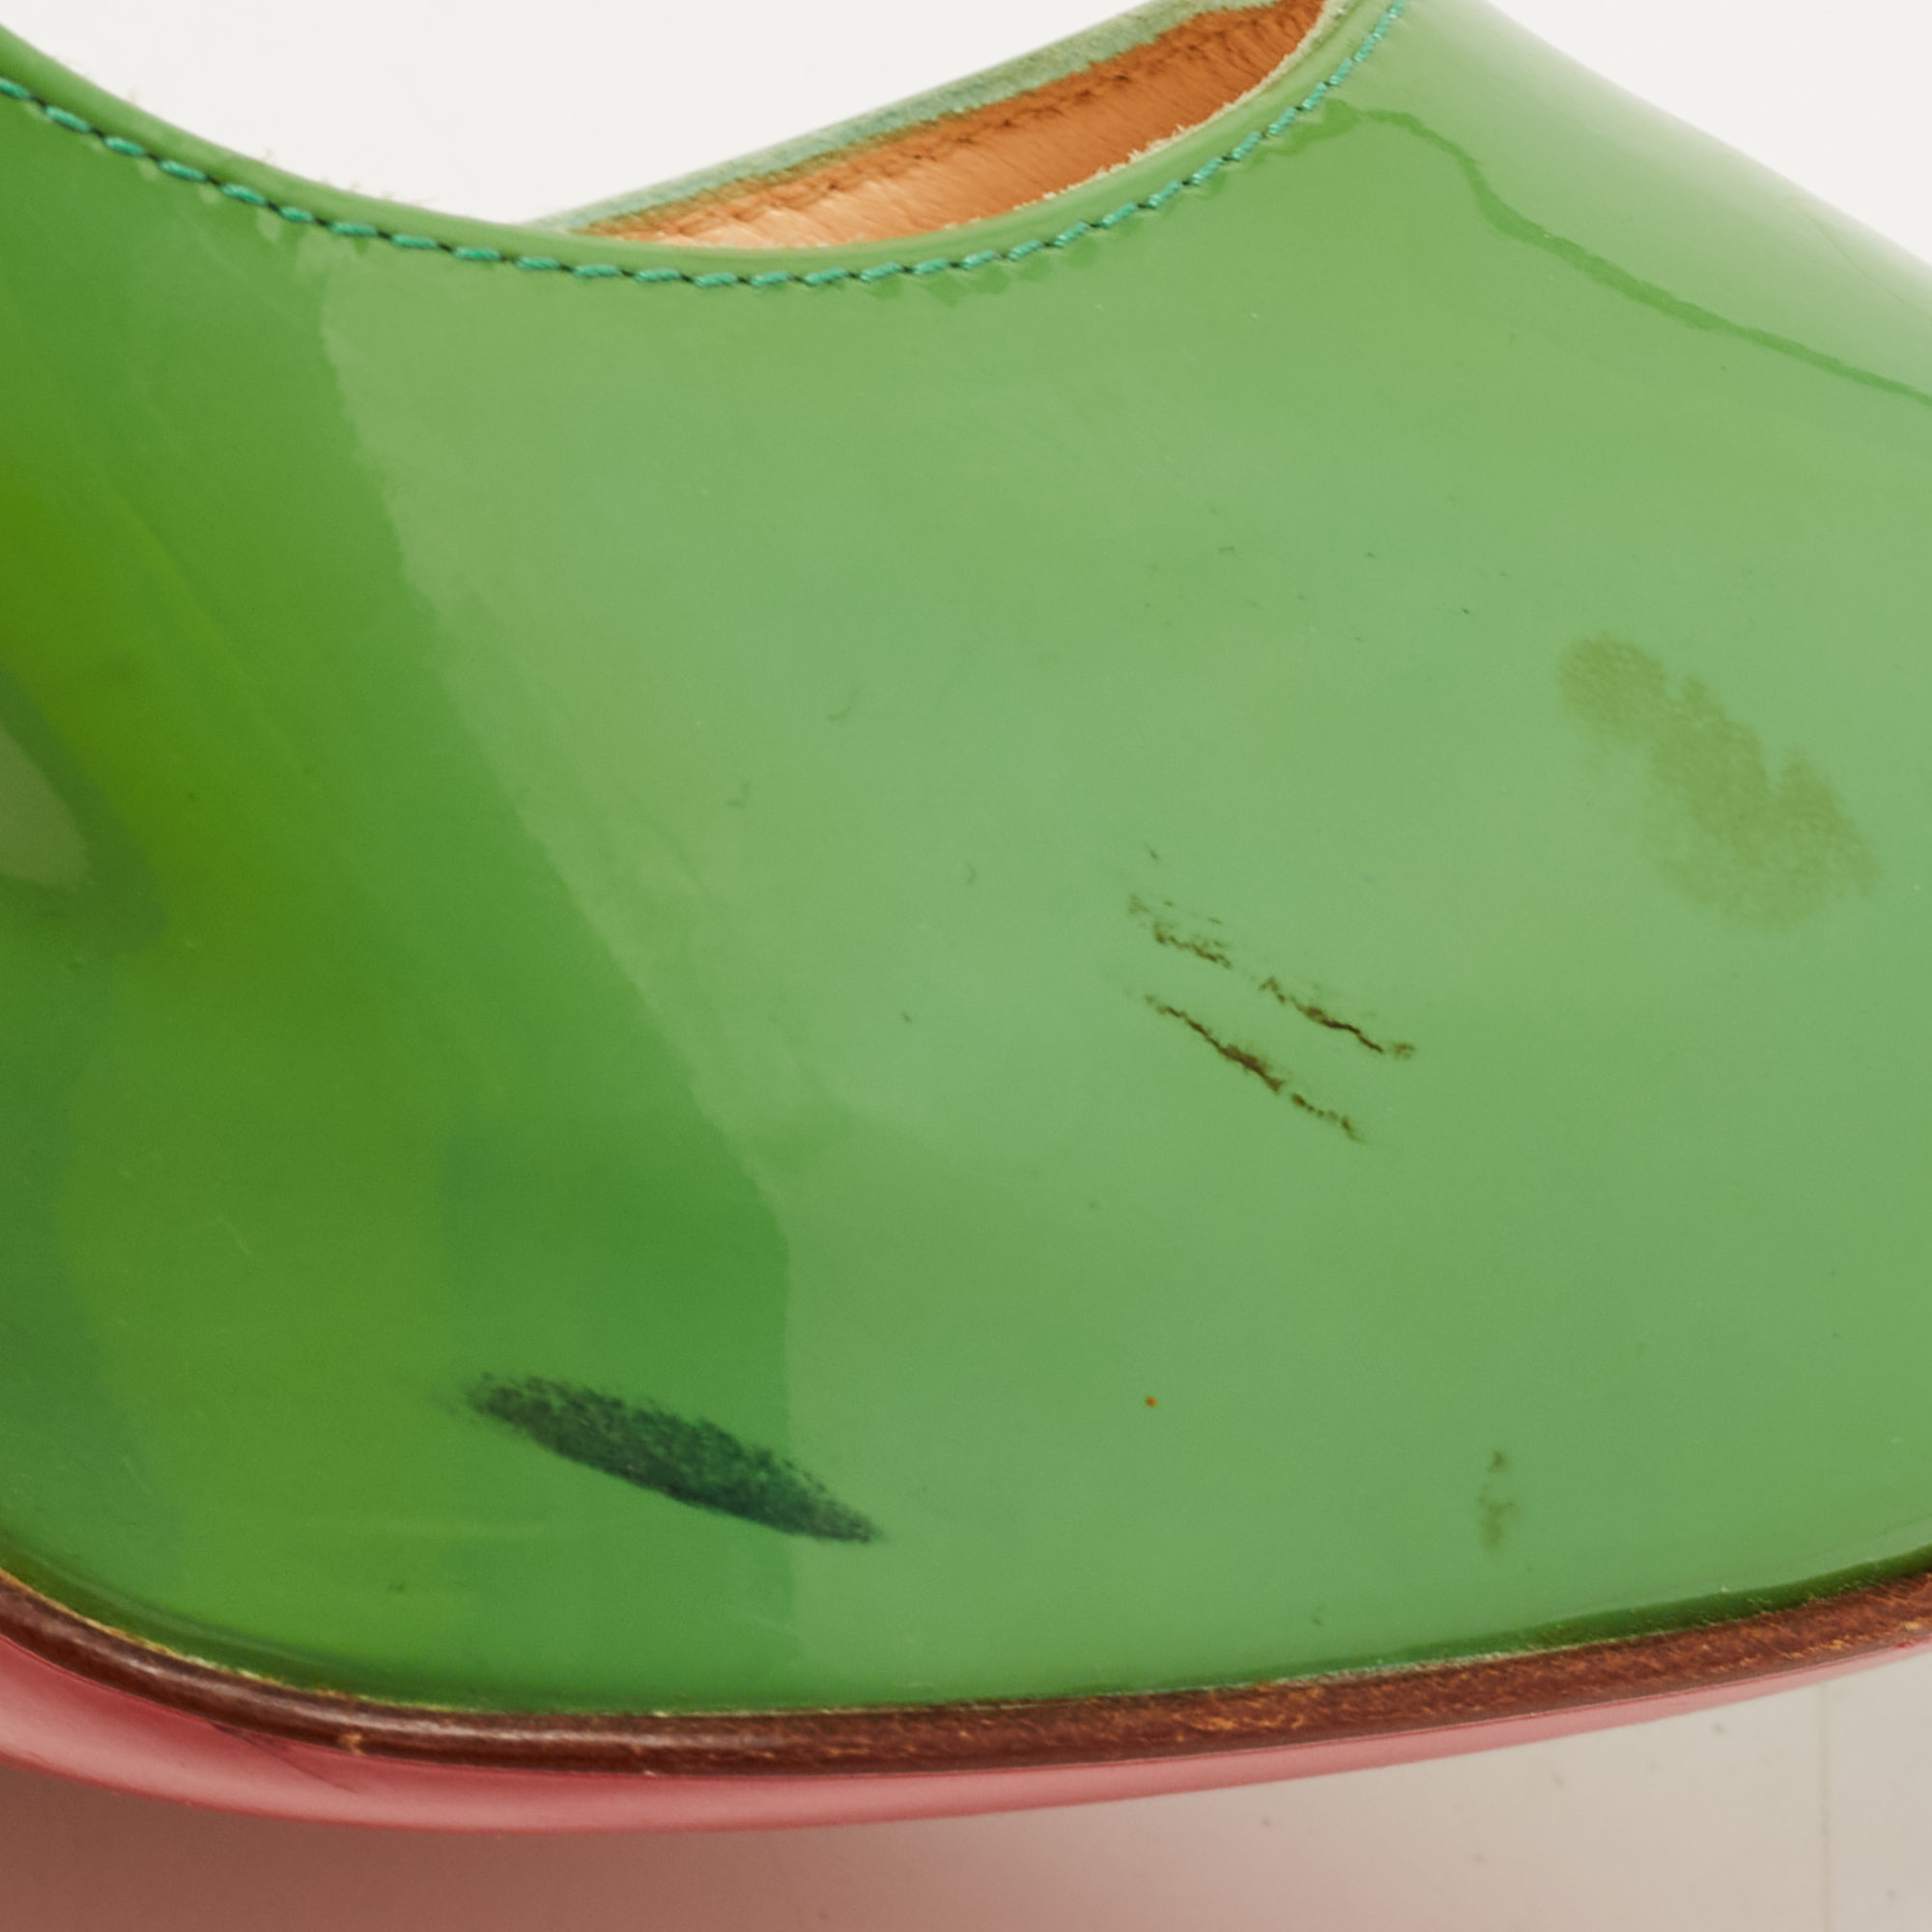 Christian Louboutin Green Patent Leather Very Prive Pumps Size 38.5